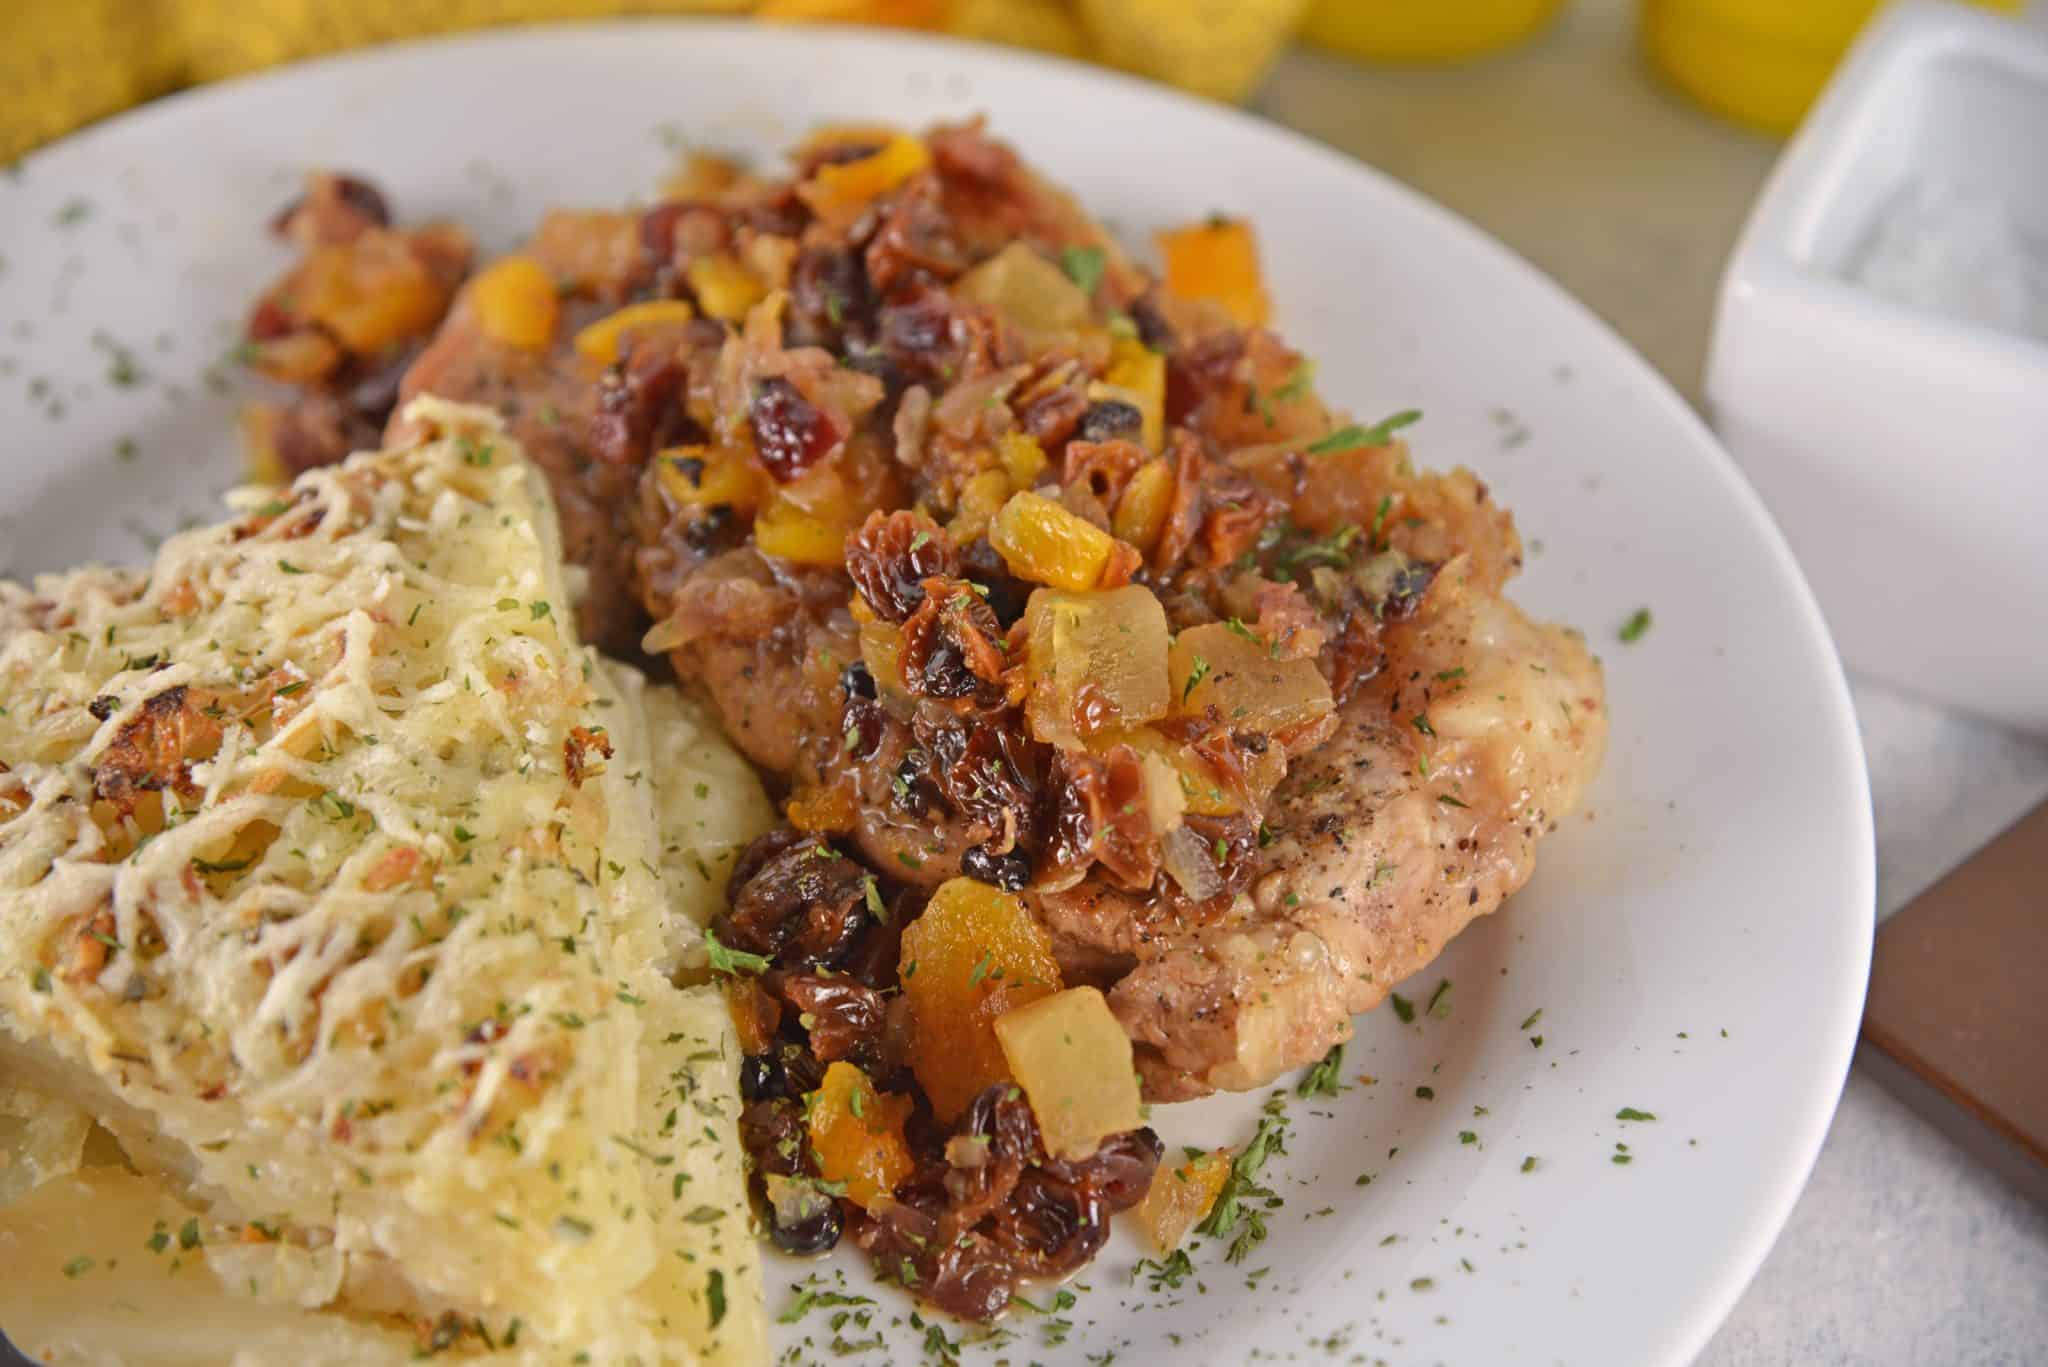 Fruit Smothered Pork Chops are pan fried pork chops with a zesty dried fruit sauce, taking 30 minutes from start to finish! #fruitsmotheredporkchops #panfriedporkchops www.savoryexperiments.com